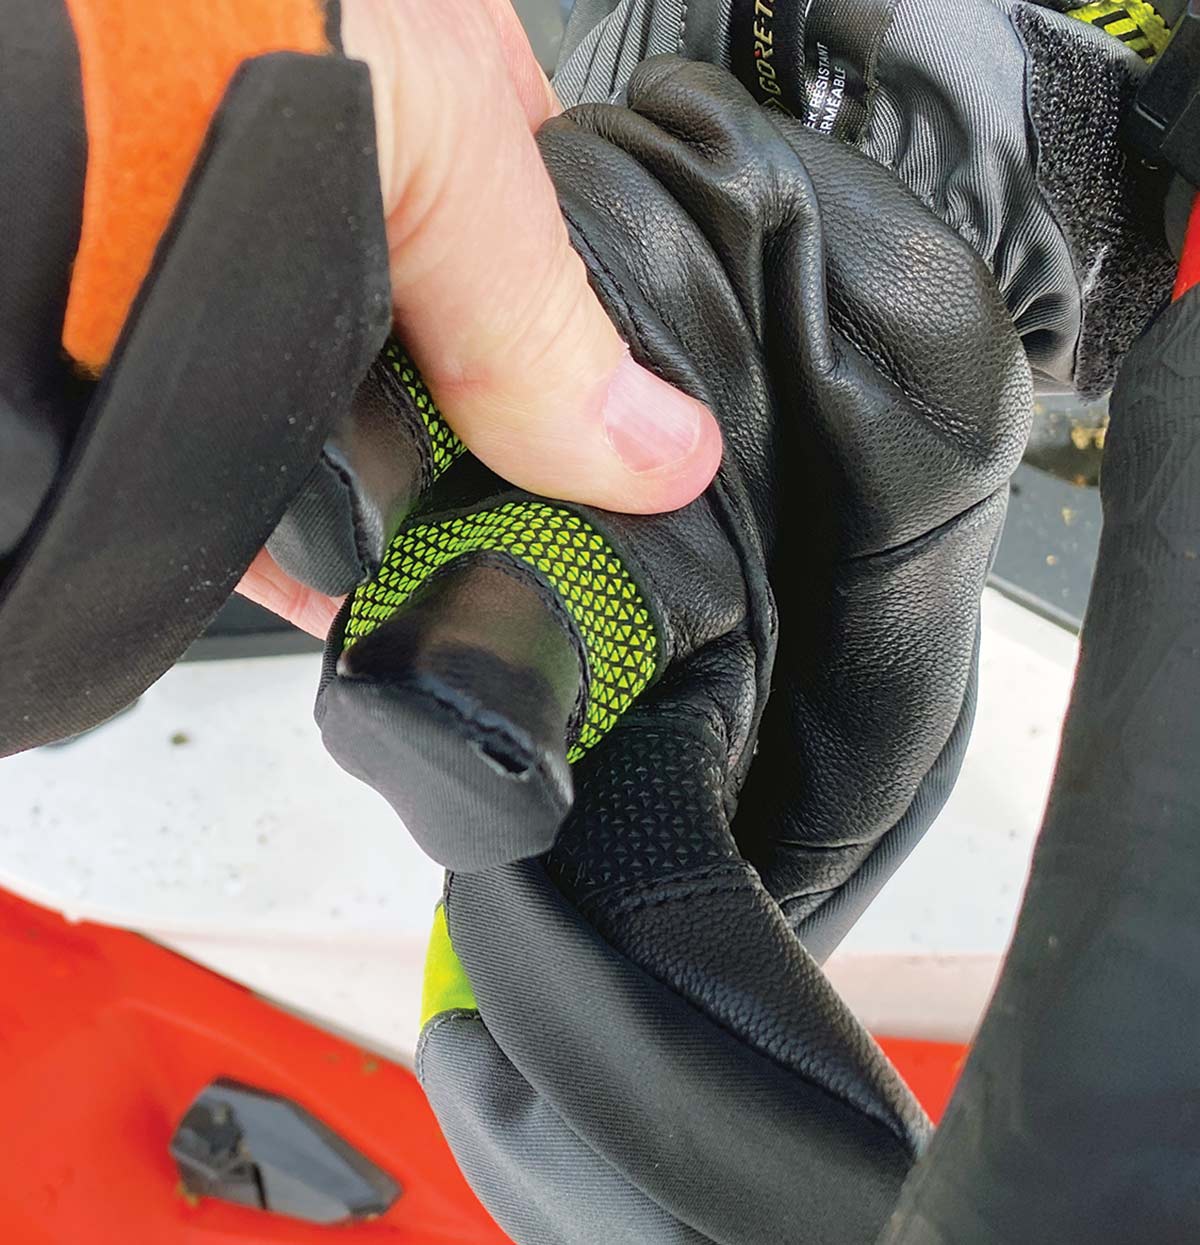 the brake lever in a glove finger